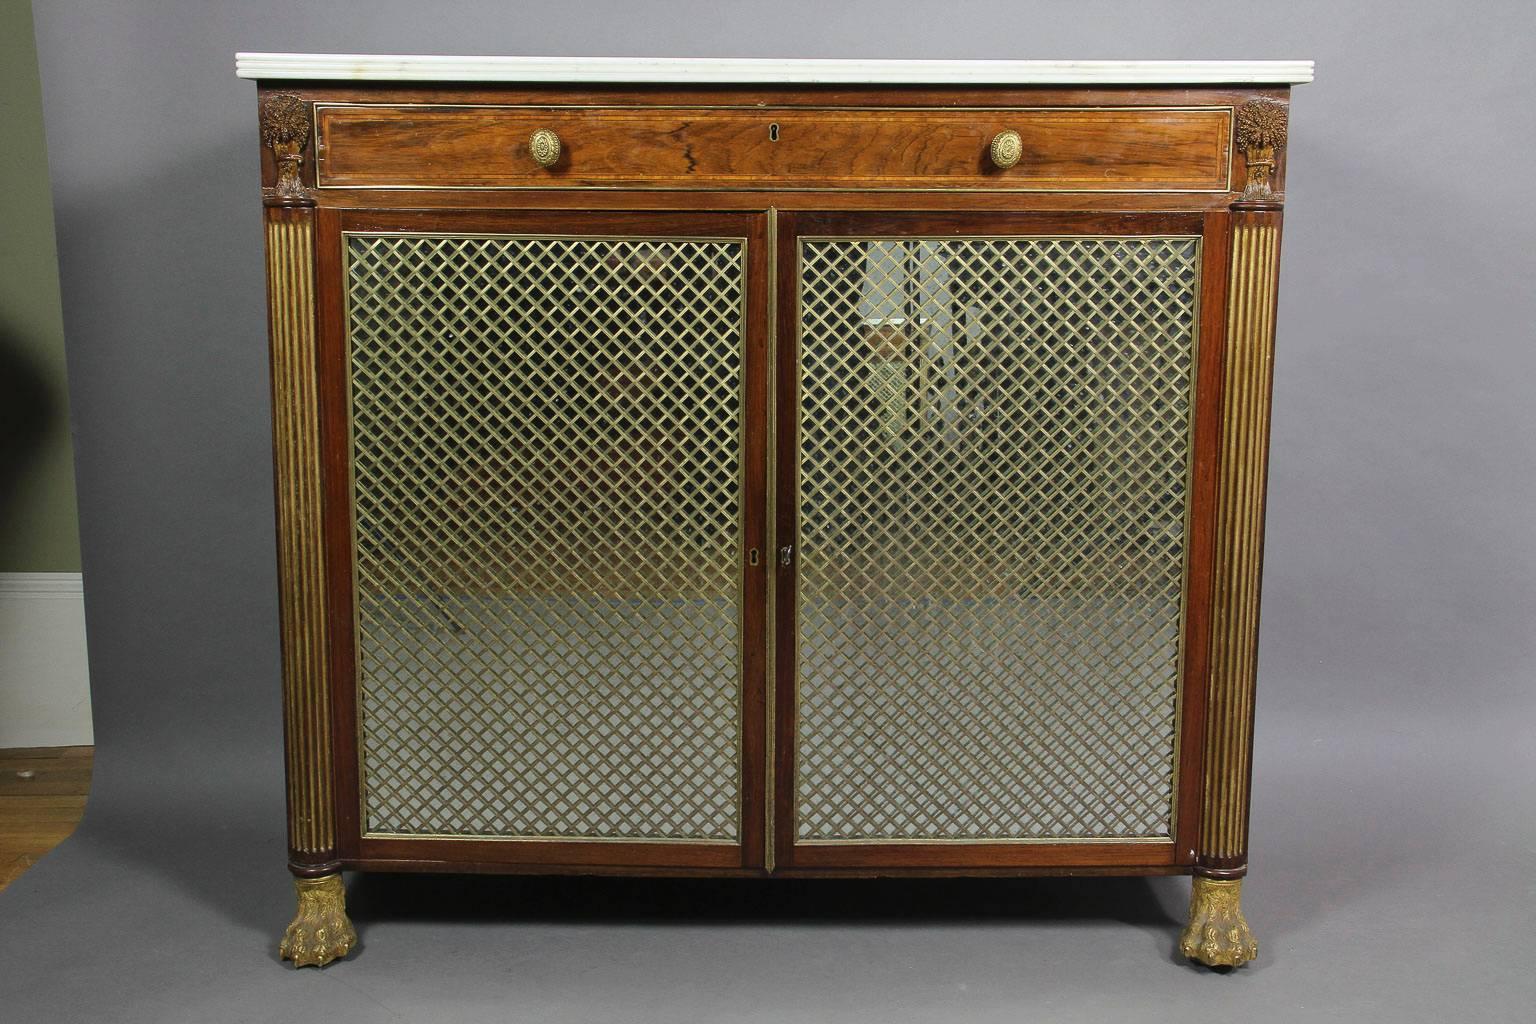 Rectangular reeded edge white marble-top over a case with a central drawer flanked by cornucopia all-over a pair of mirrored grill doors, raised on cast bronze lion feet.